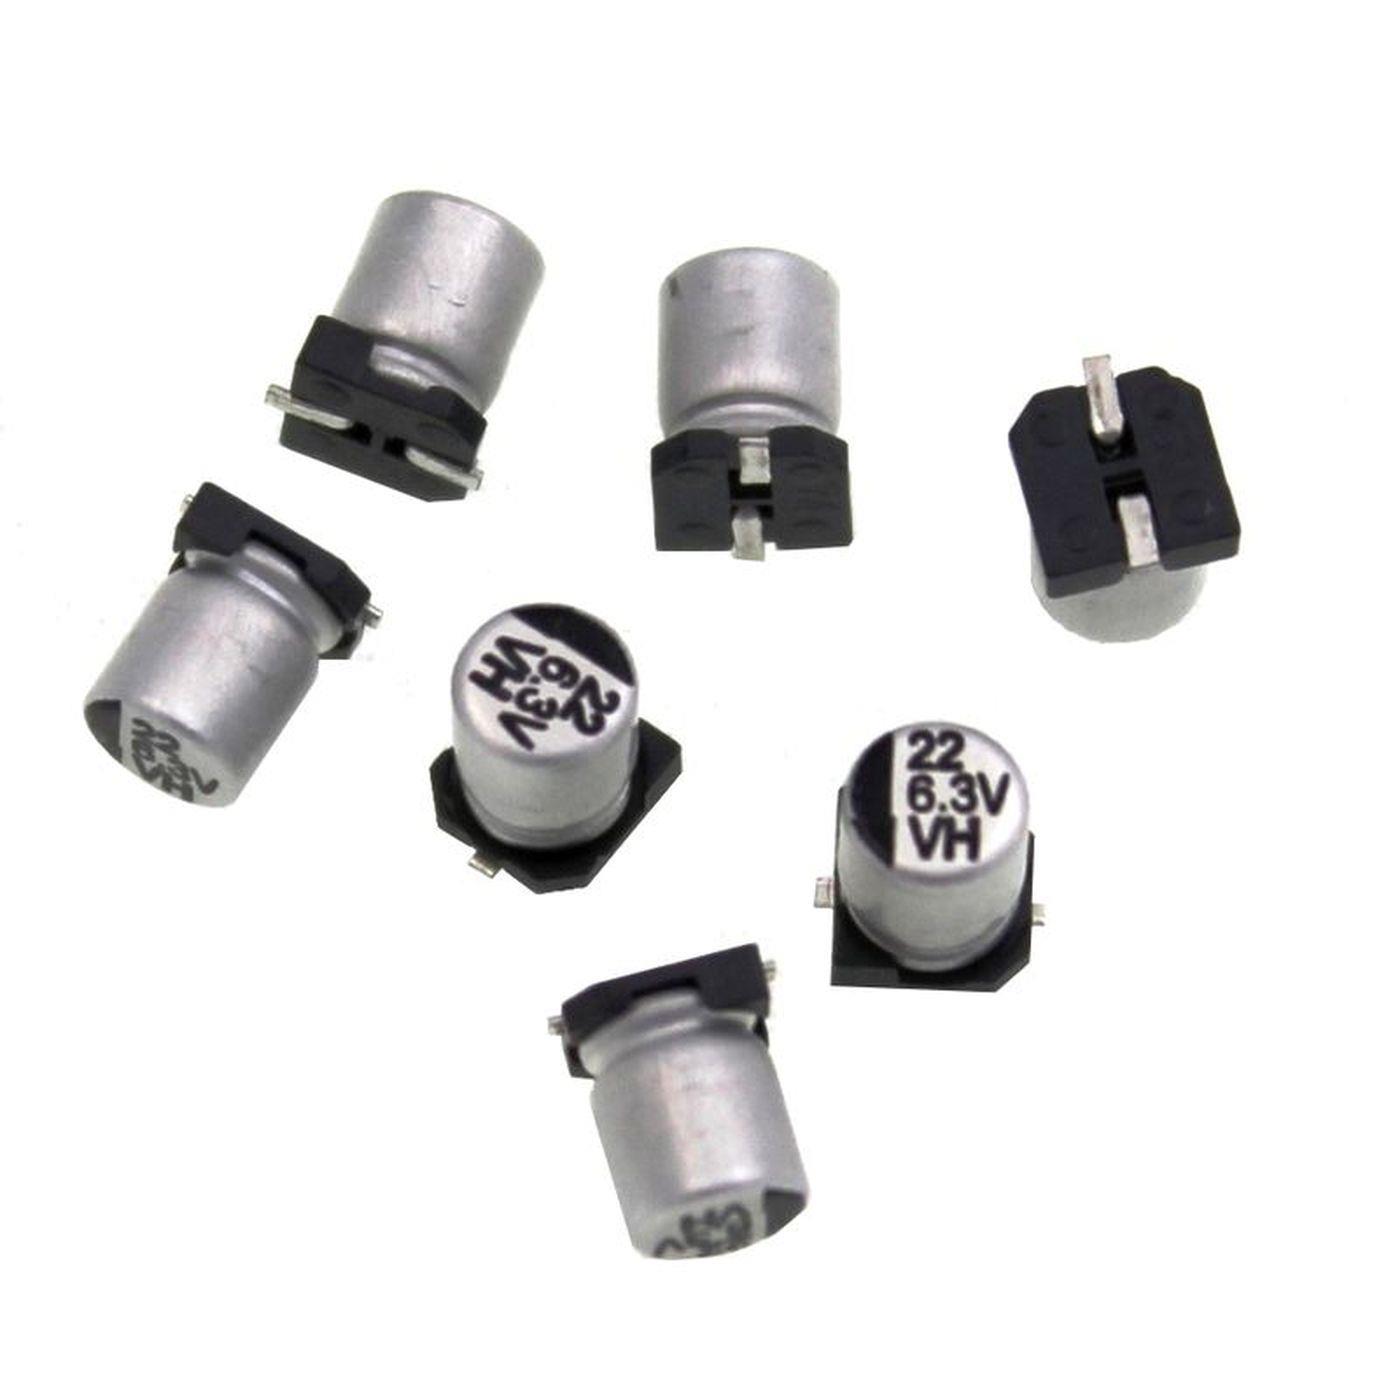 SMD Electrolytic capacitor 22µF 6,3V 85°C CE006M0022REB405 d4x5mm 22uF